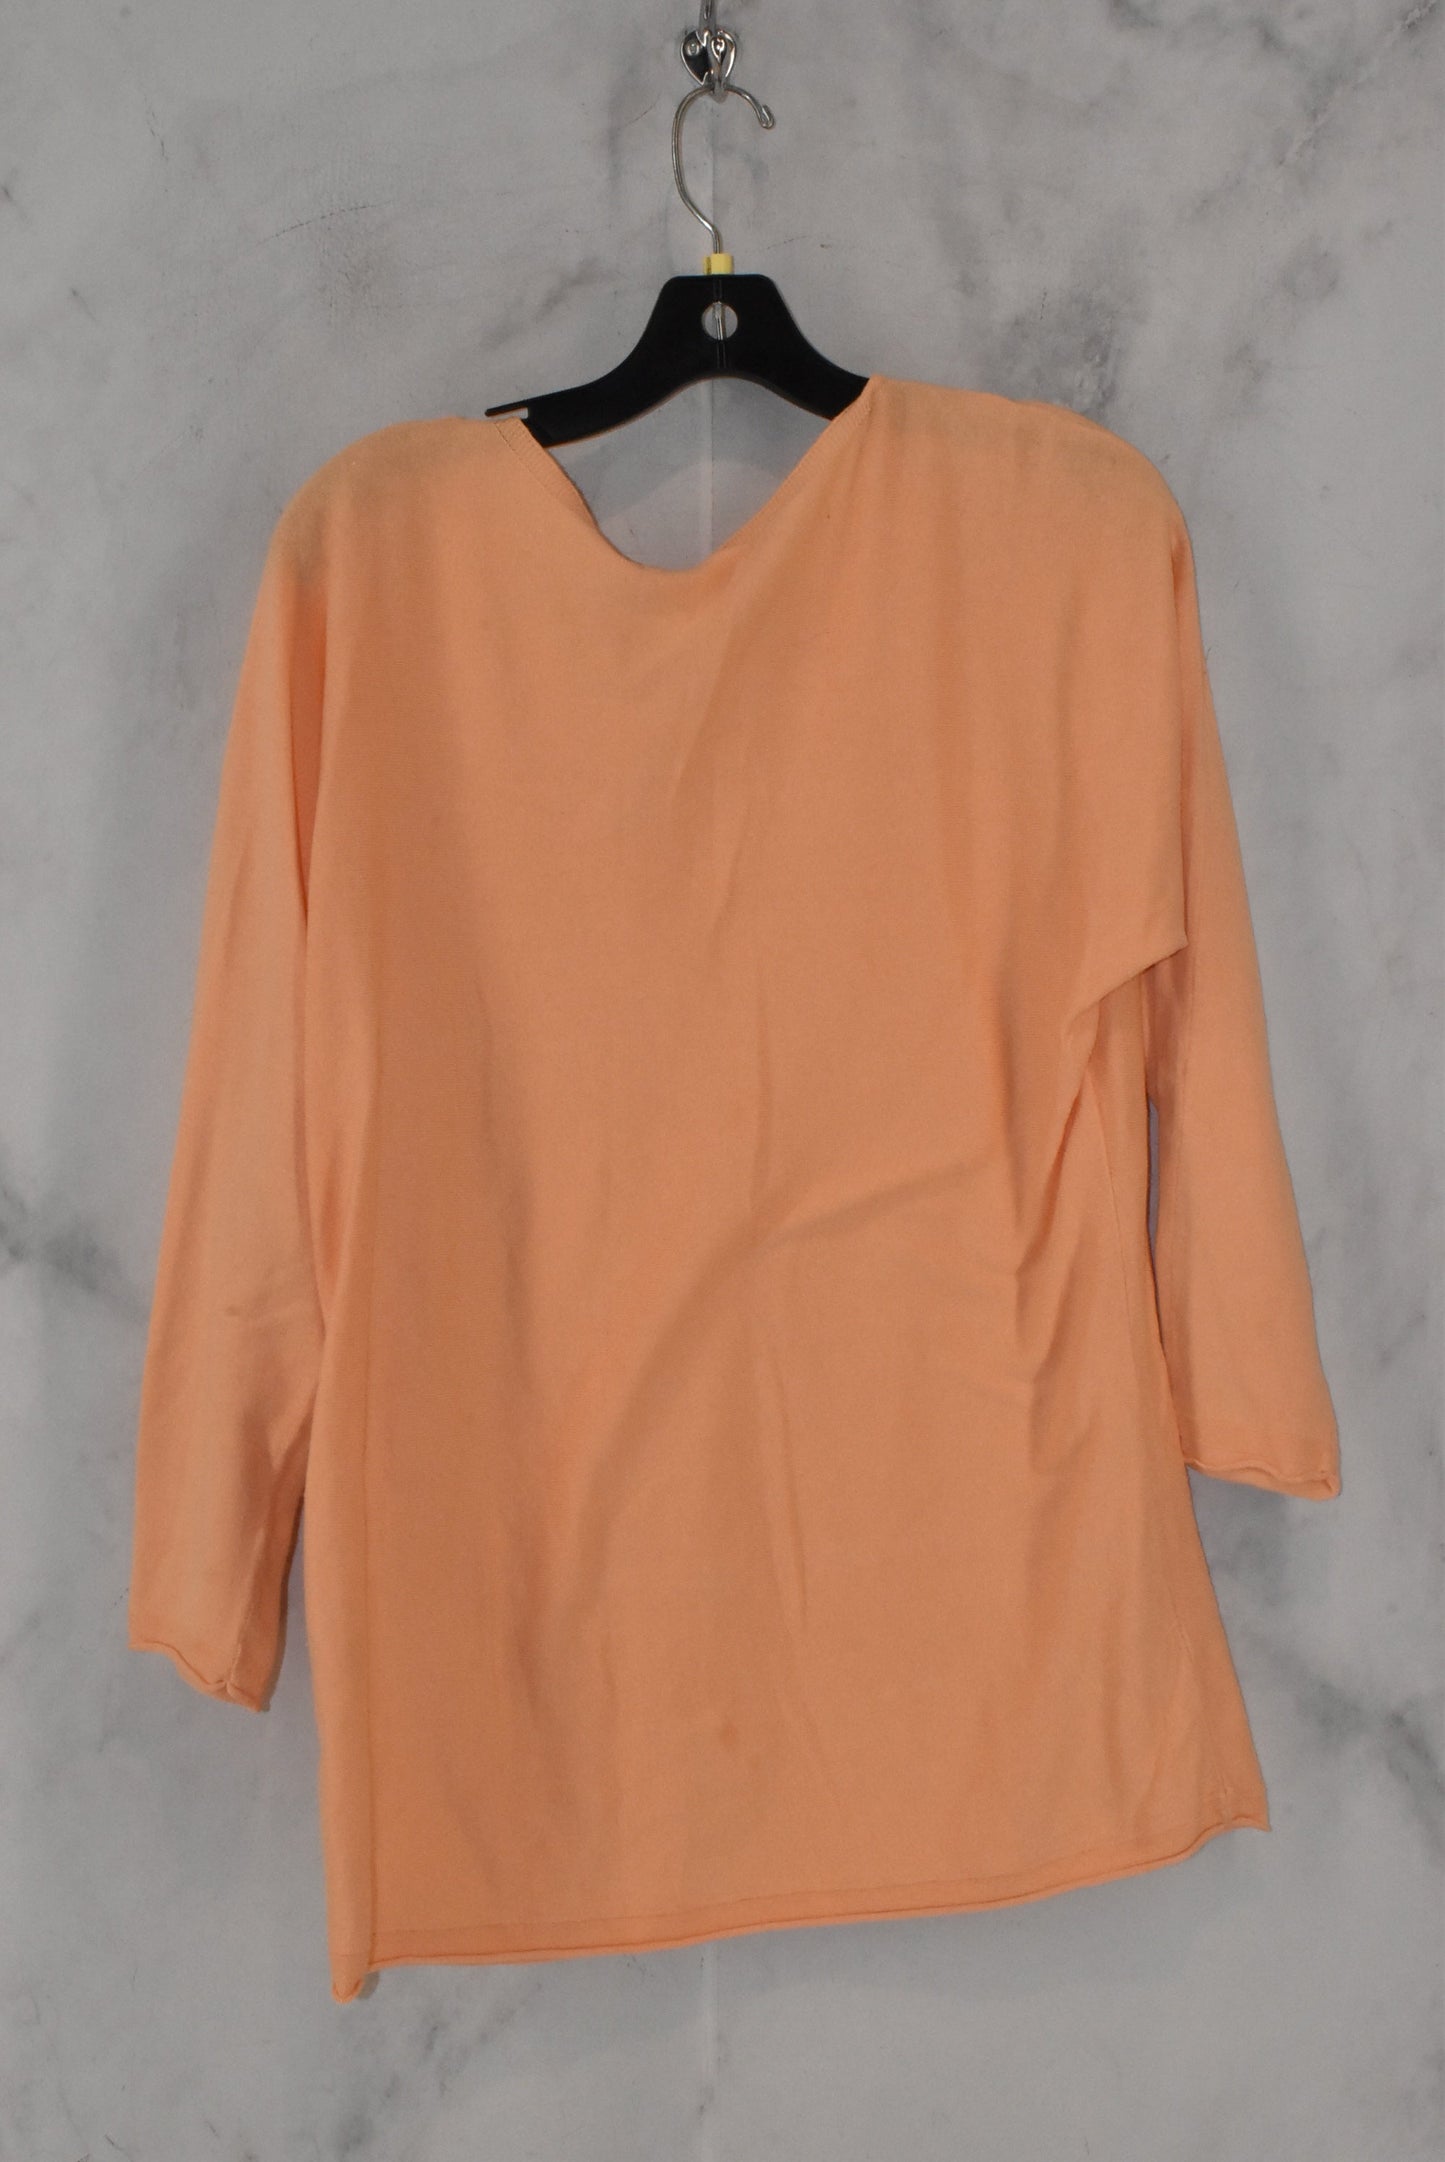 Top Long Sleeve By Chicos  Size: 2